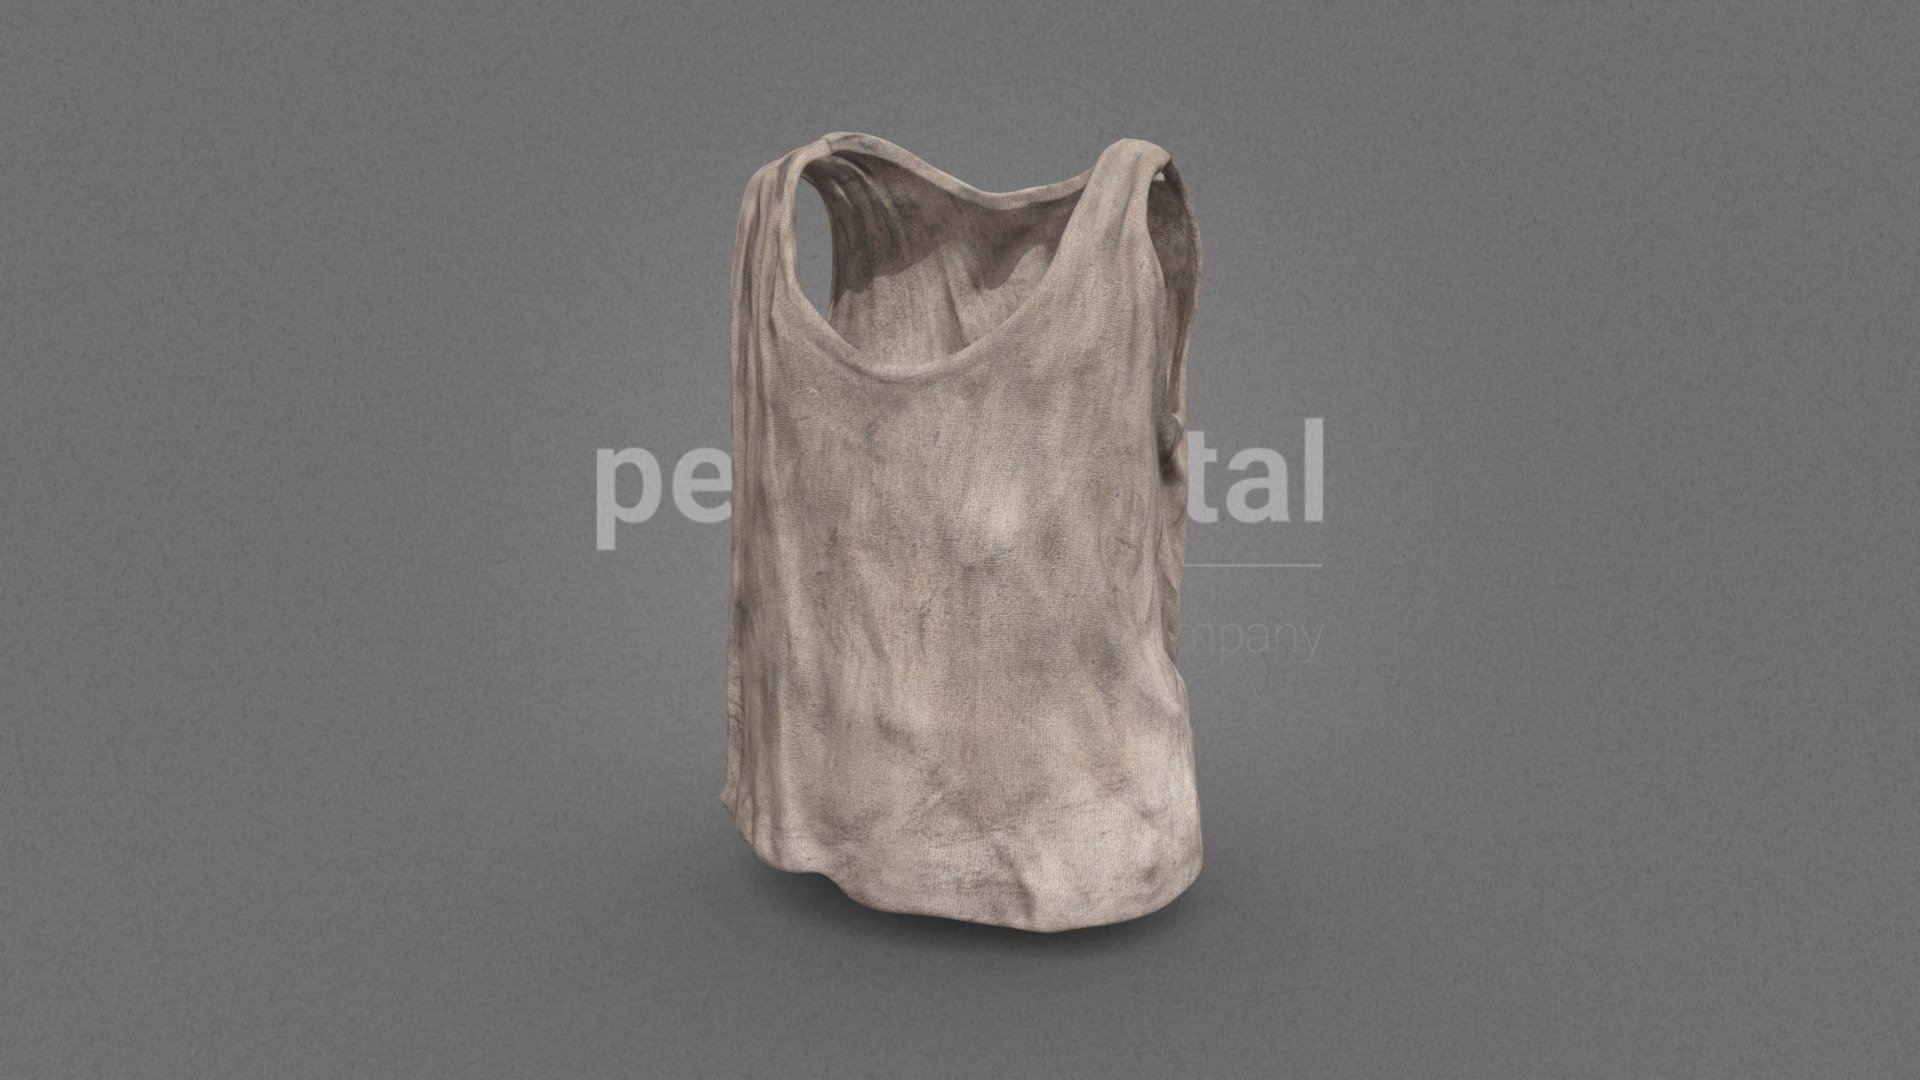 Our Wasteland Garments collection consists of several garments, which you can use in your audiovisual creations, extracted and modeled from our catalog of photogrammetry pieces.

They are optimized for use in 3D scenes of high polygonalization and optimized for rendering. We do not include characters, but they are positioned for you to include and adjust your own character. They have a model LOW (_LODRIG) inside the Blender file (included in the AdditionalFiles), which you can use for vertex weighting or cloth simulation and thus, make the transfer of vertices or property masks from the LOW to the HIGH** model.

We have included the texture maps in high resolution, as well as the Displacement maps, so you can make extreme point of view with your 3D cameras, as well as the Blender file so you can edit any aspect of the set.

Enjoy it.

Web: https://peris.digital/ - Wasteland Garments Series - Model 11 Shirt - 3D model by Peris Digital (@perisdigital) 3d model